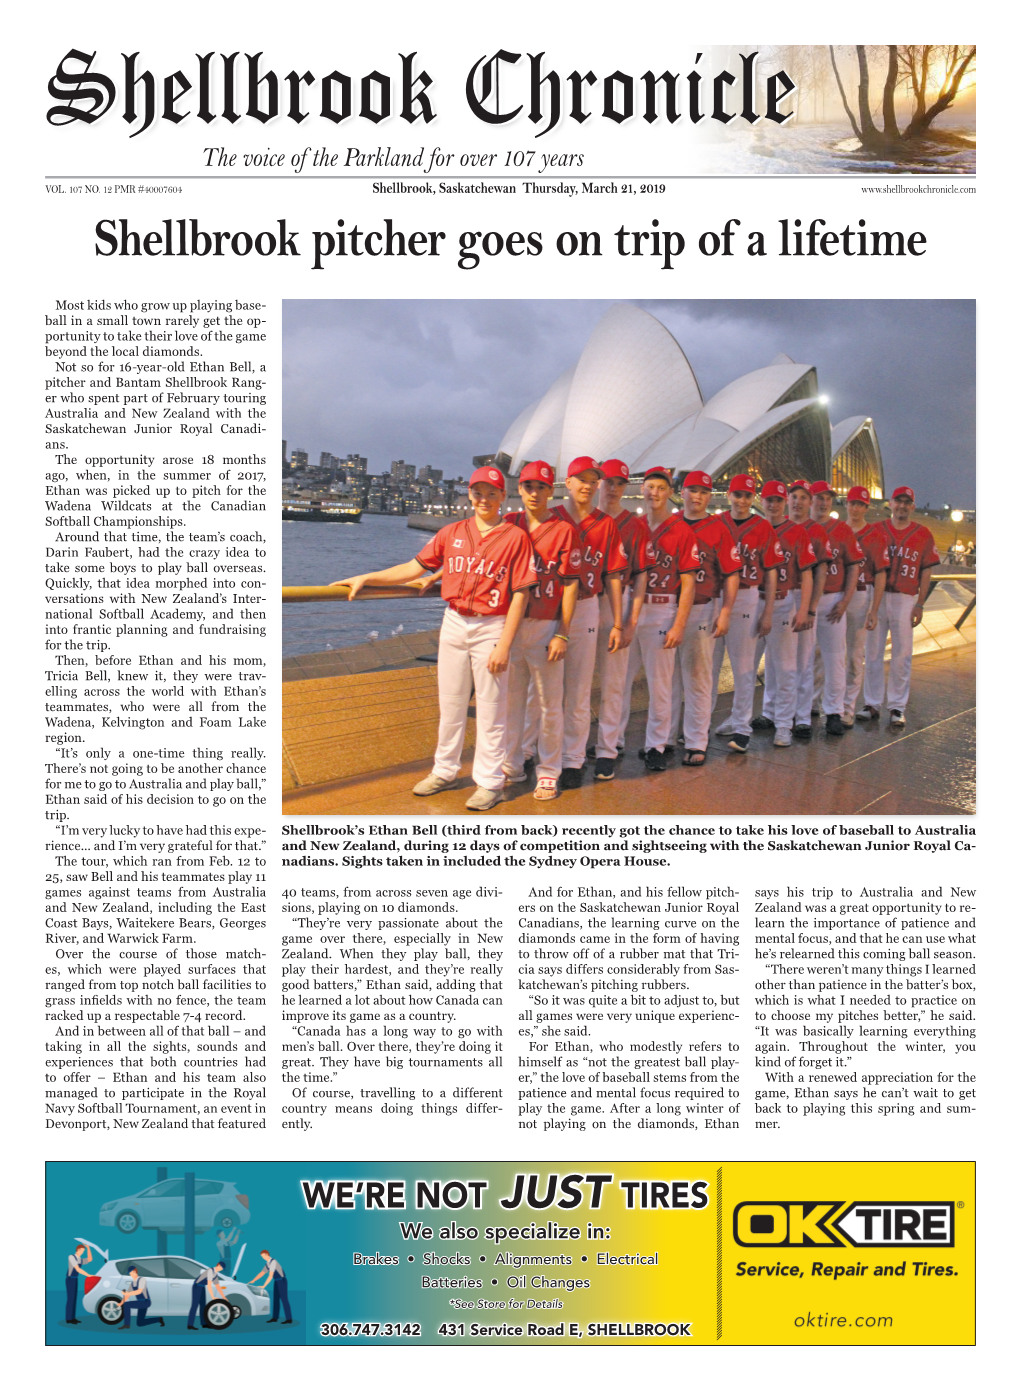 Shellbrook Pitcher Goes on Trip of a Lifetime